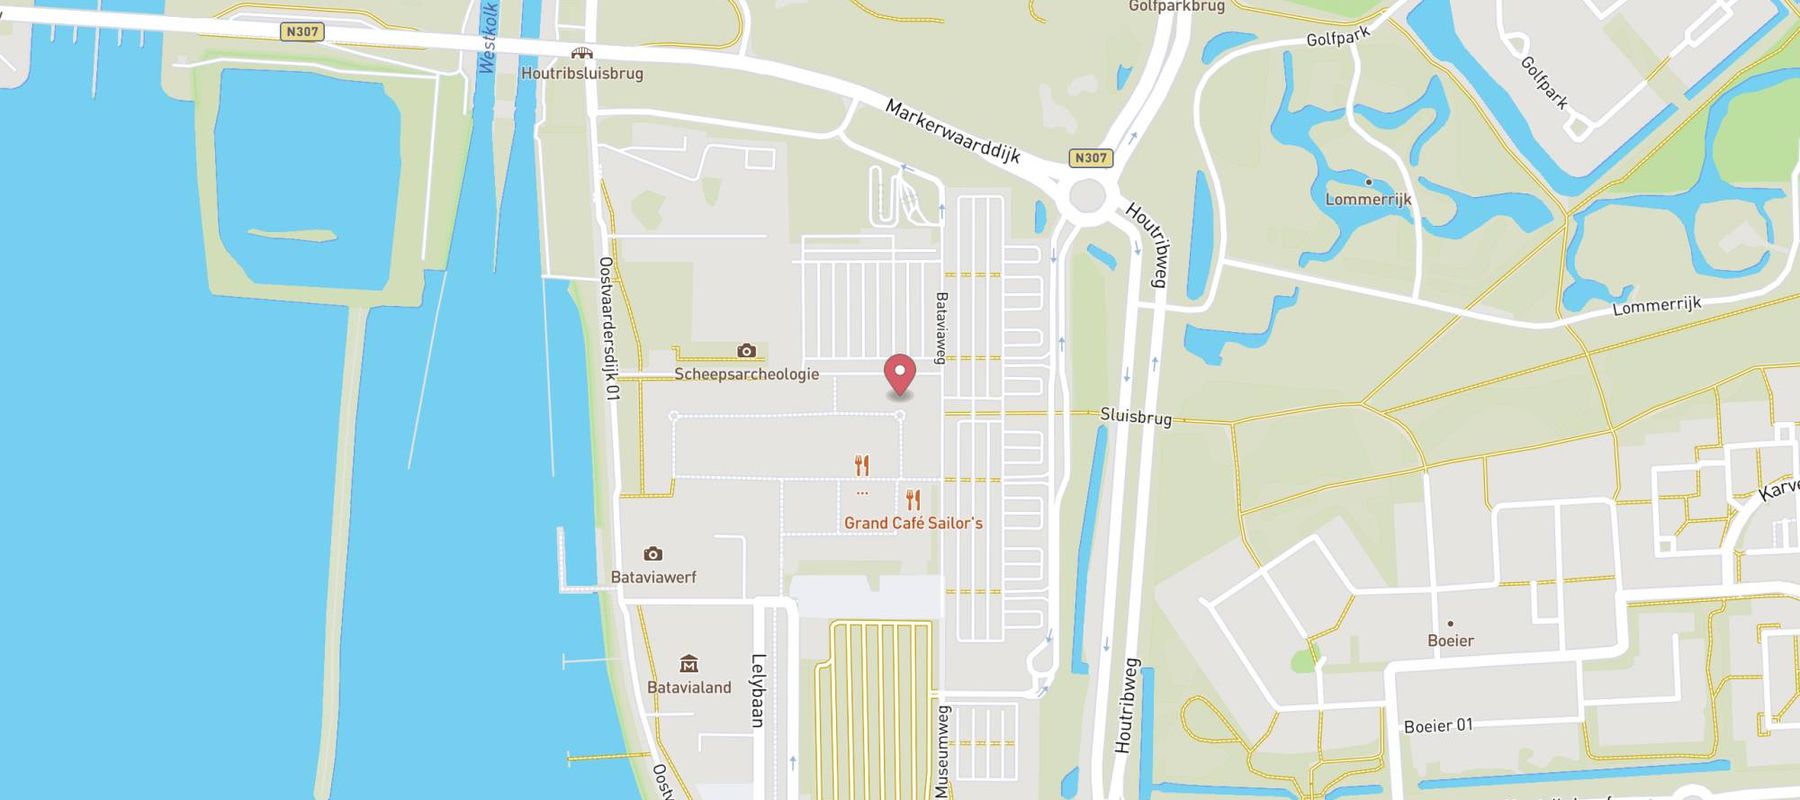 Adidas Outlet Store Lelystad map